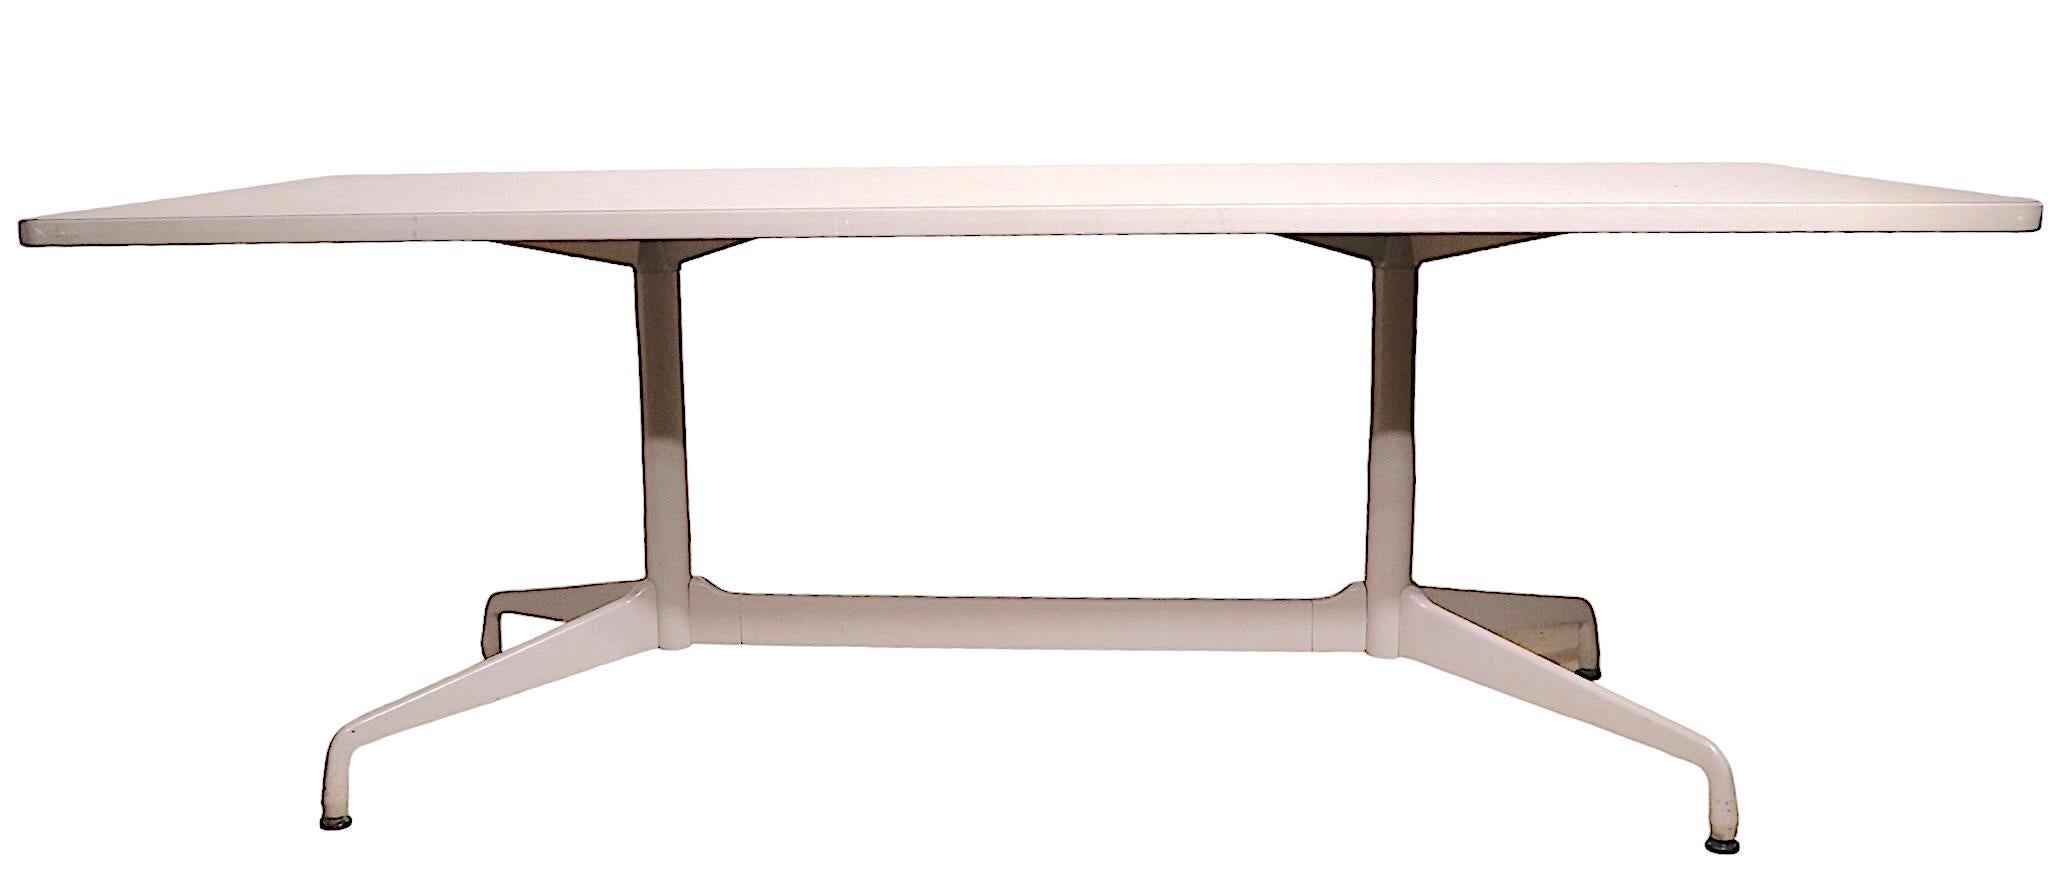 Unusual Eames segmented base conference, dining table, with an off white base and an off white formica table top. The table was originally designed in the 1960's, this example was produced in 2009. Original, clean and ready to use condition, showing